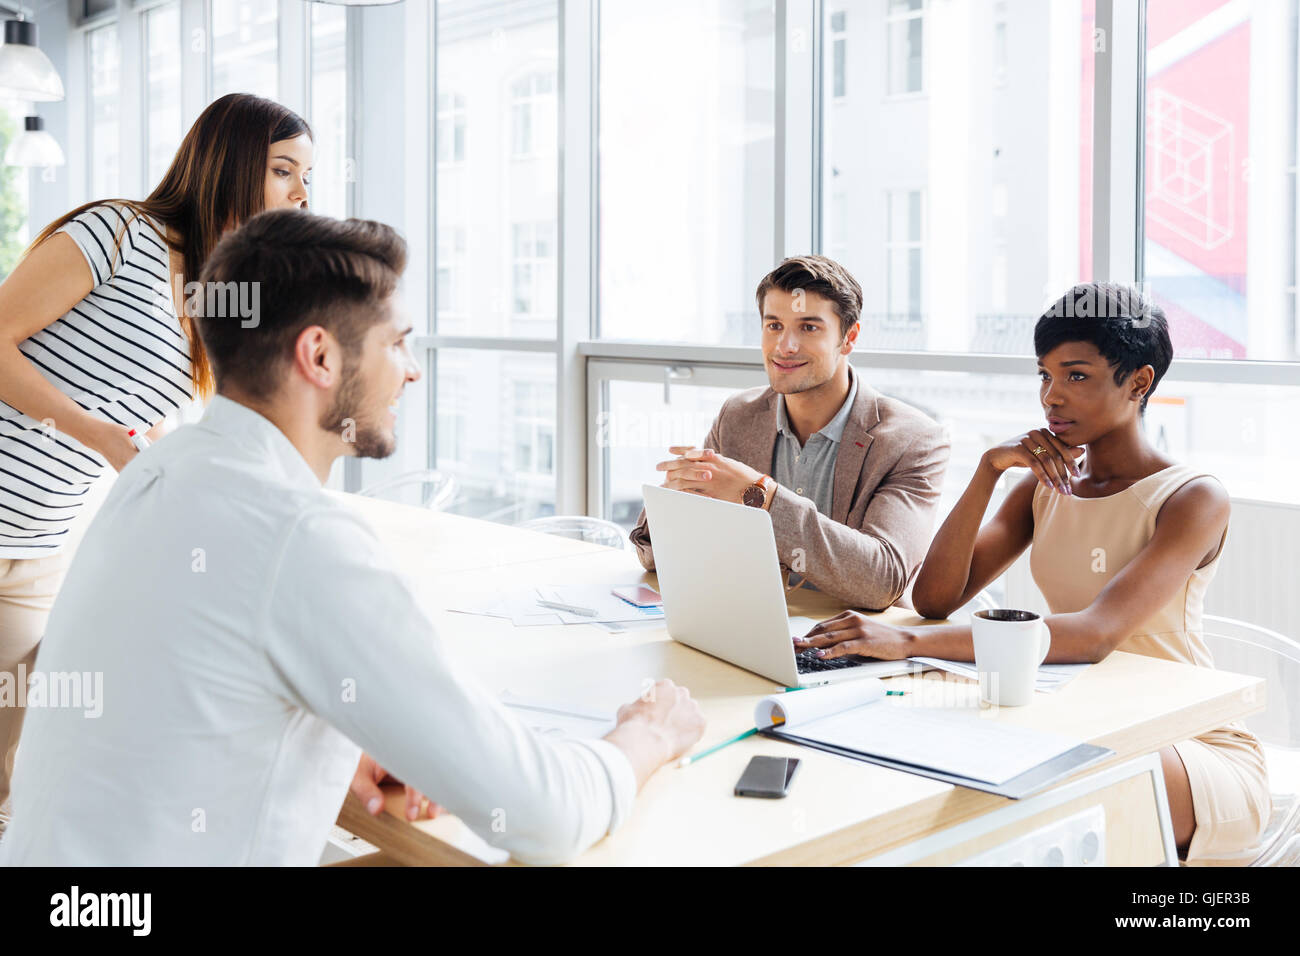 Successful young business people talking and working together in office Stock Photo